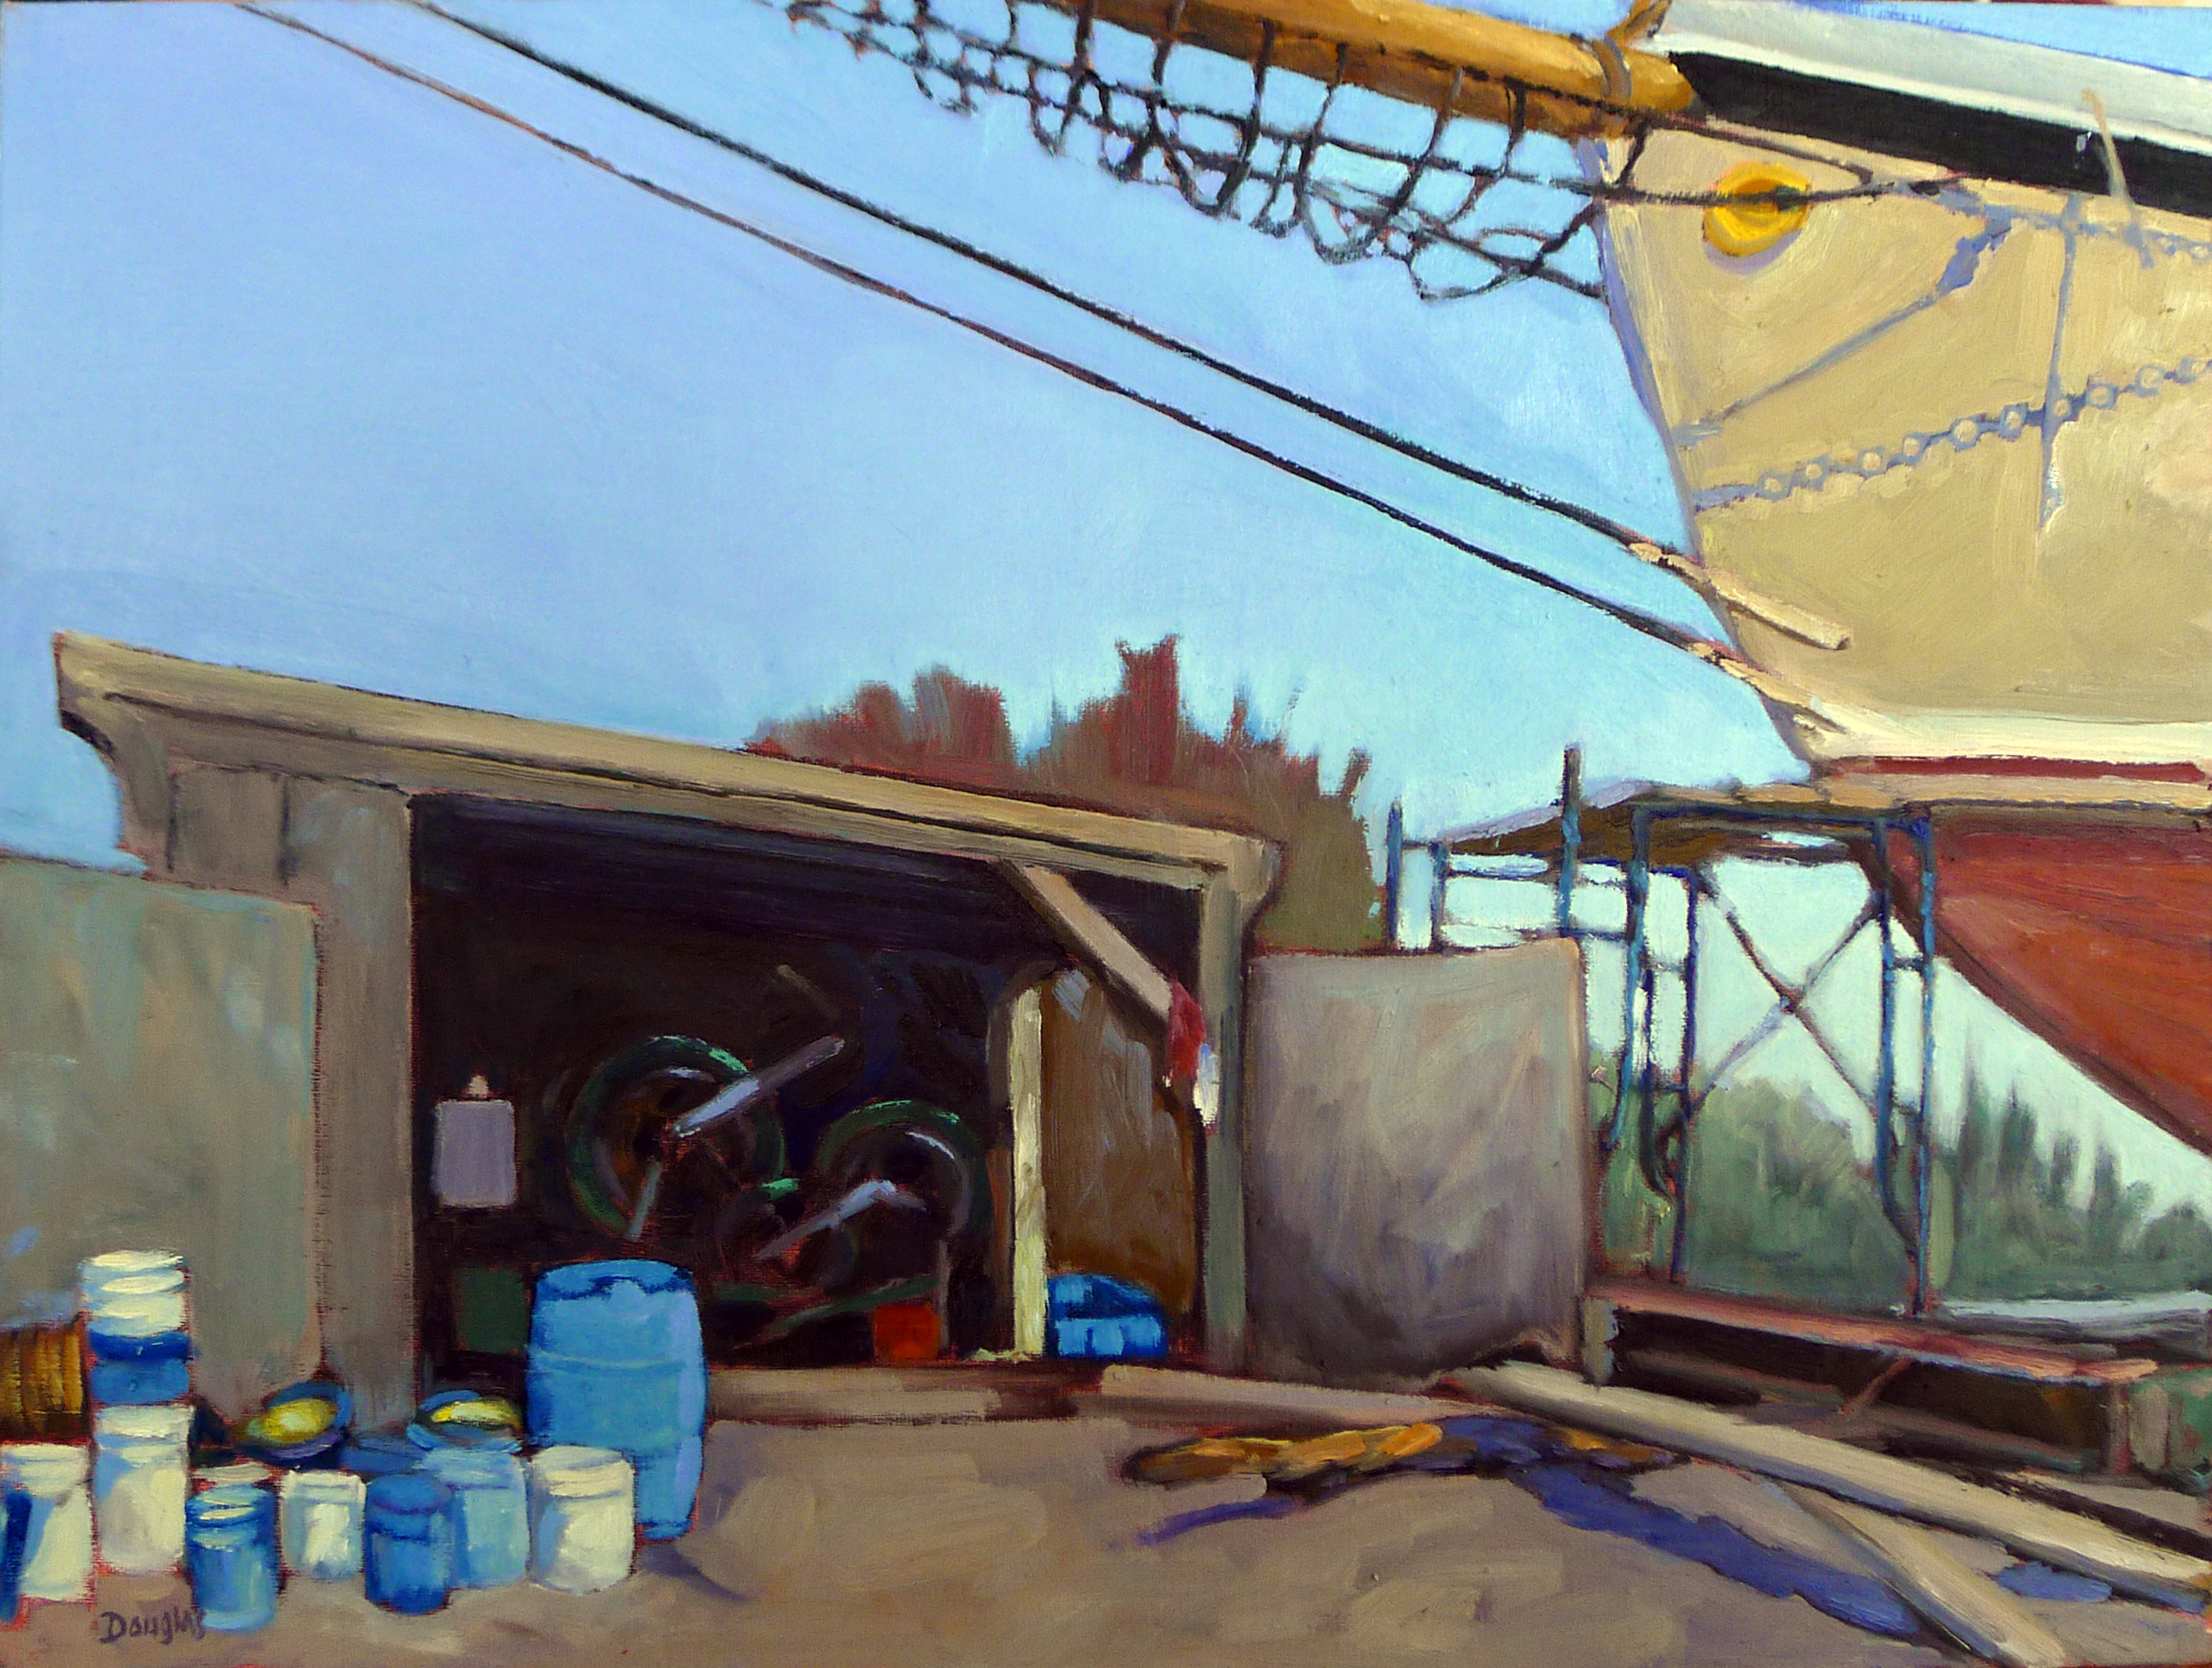 American Eagle in Drydock, 12X16, $1159 unframed includes shipping and handling in continental US.